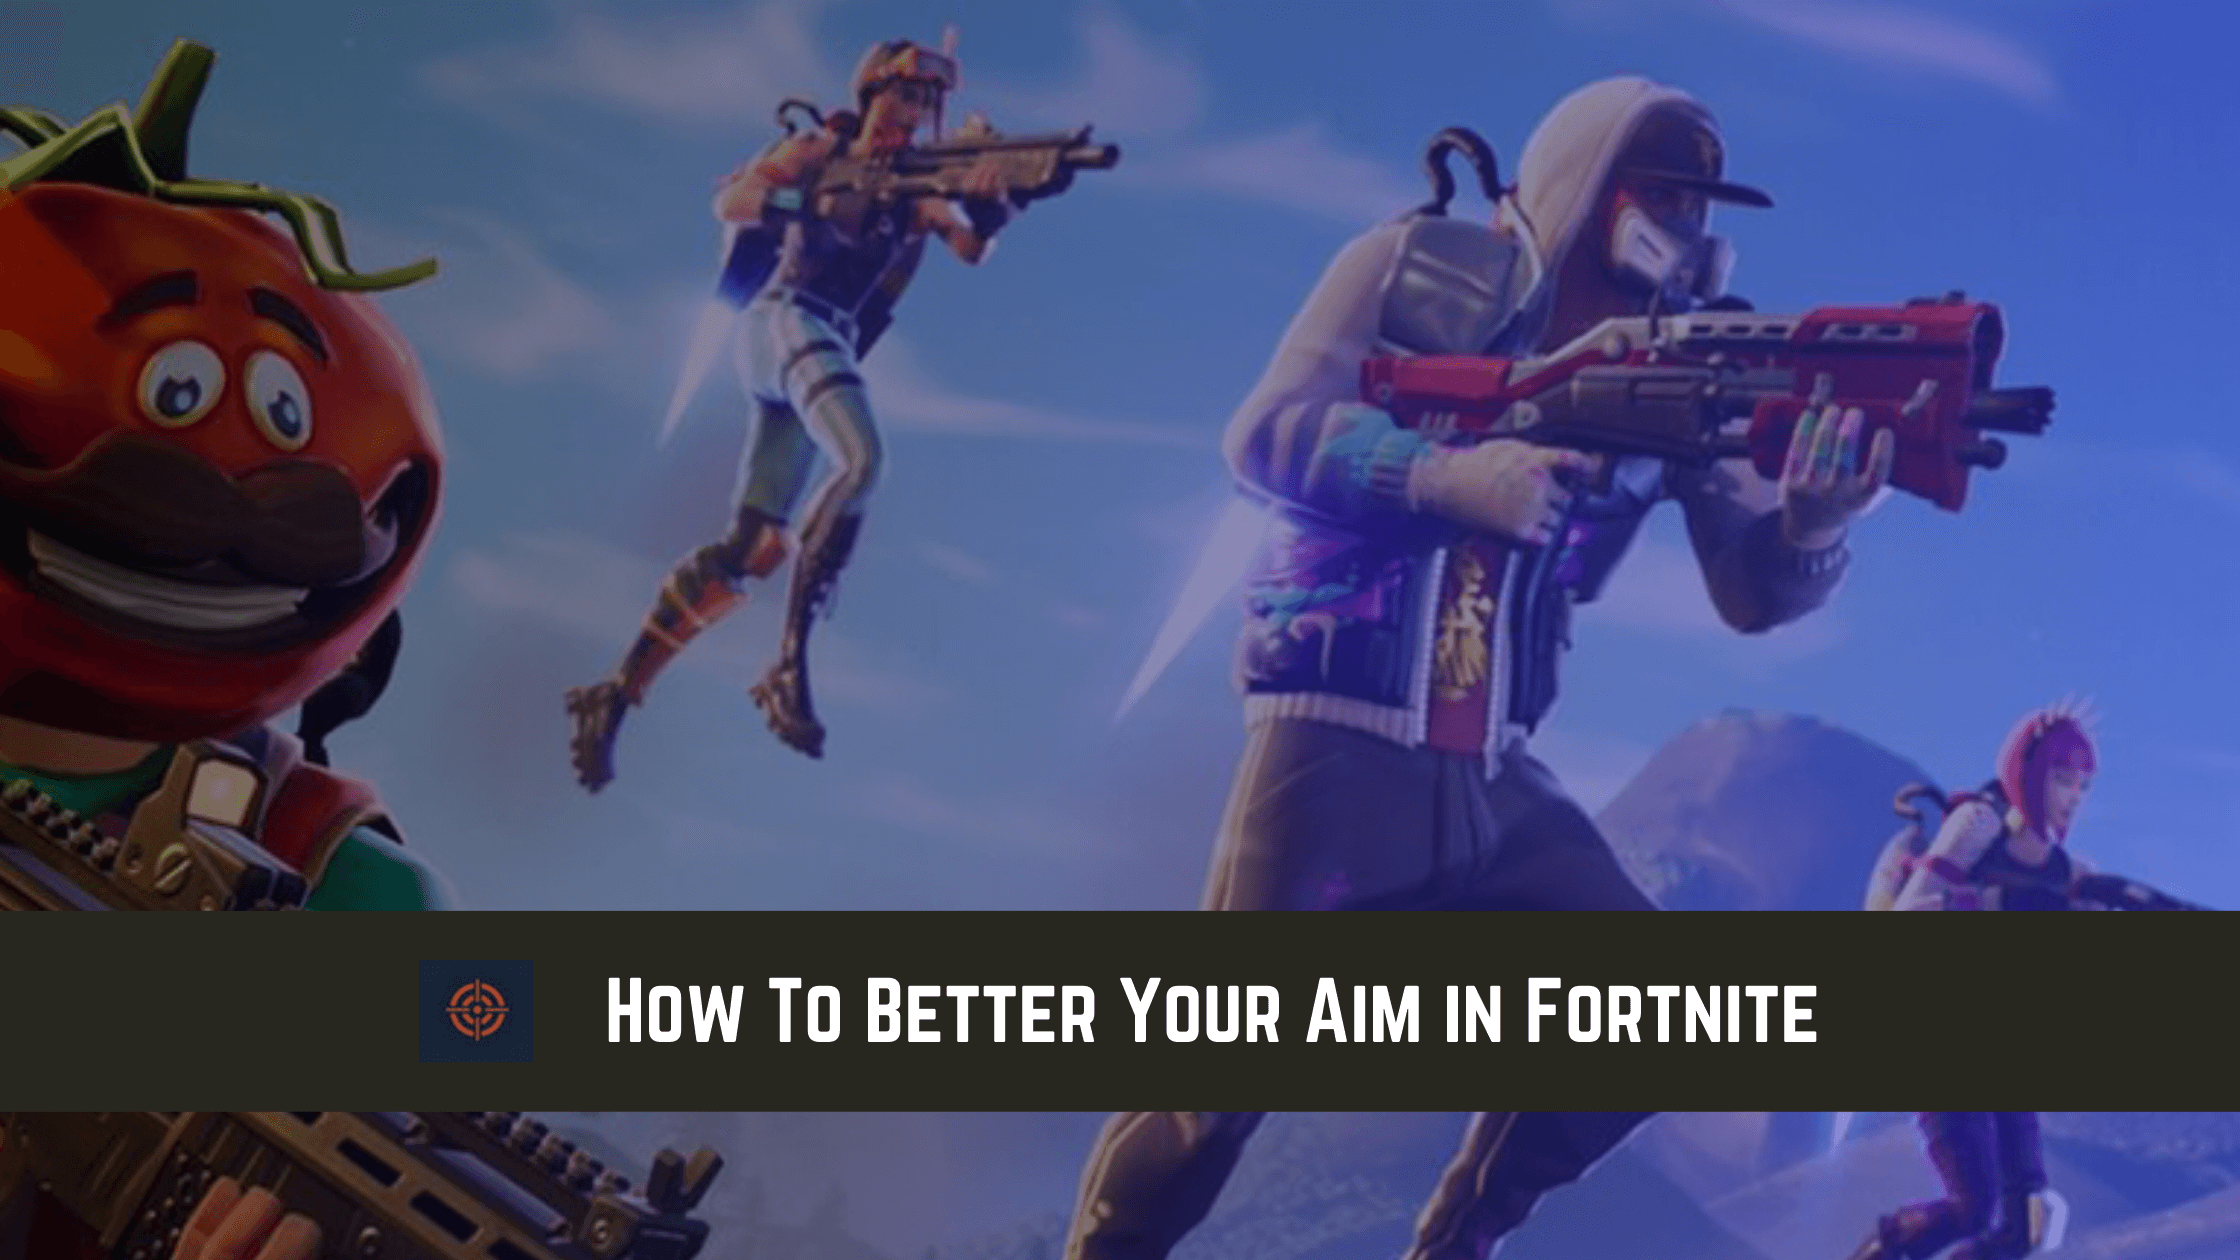 How To Better Your Aim in Fortnite